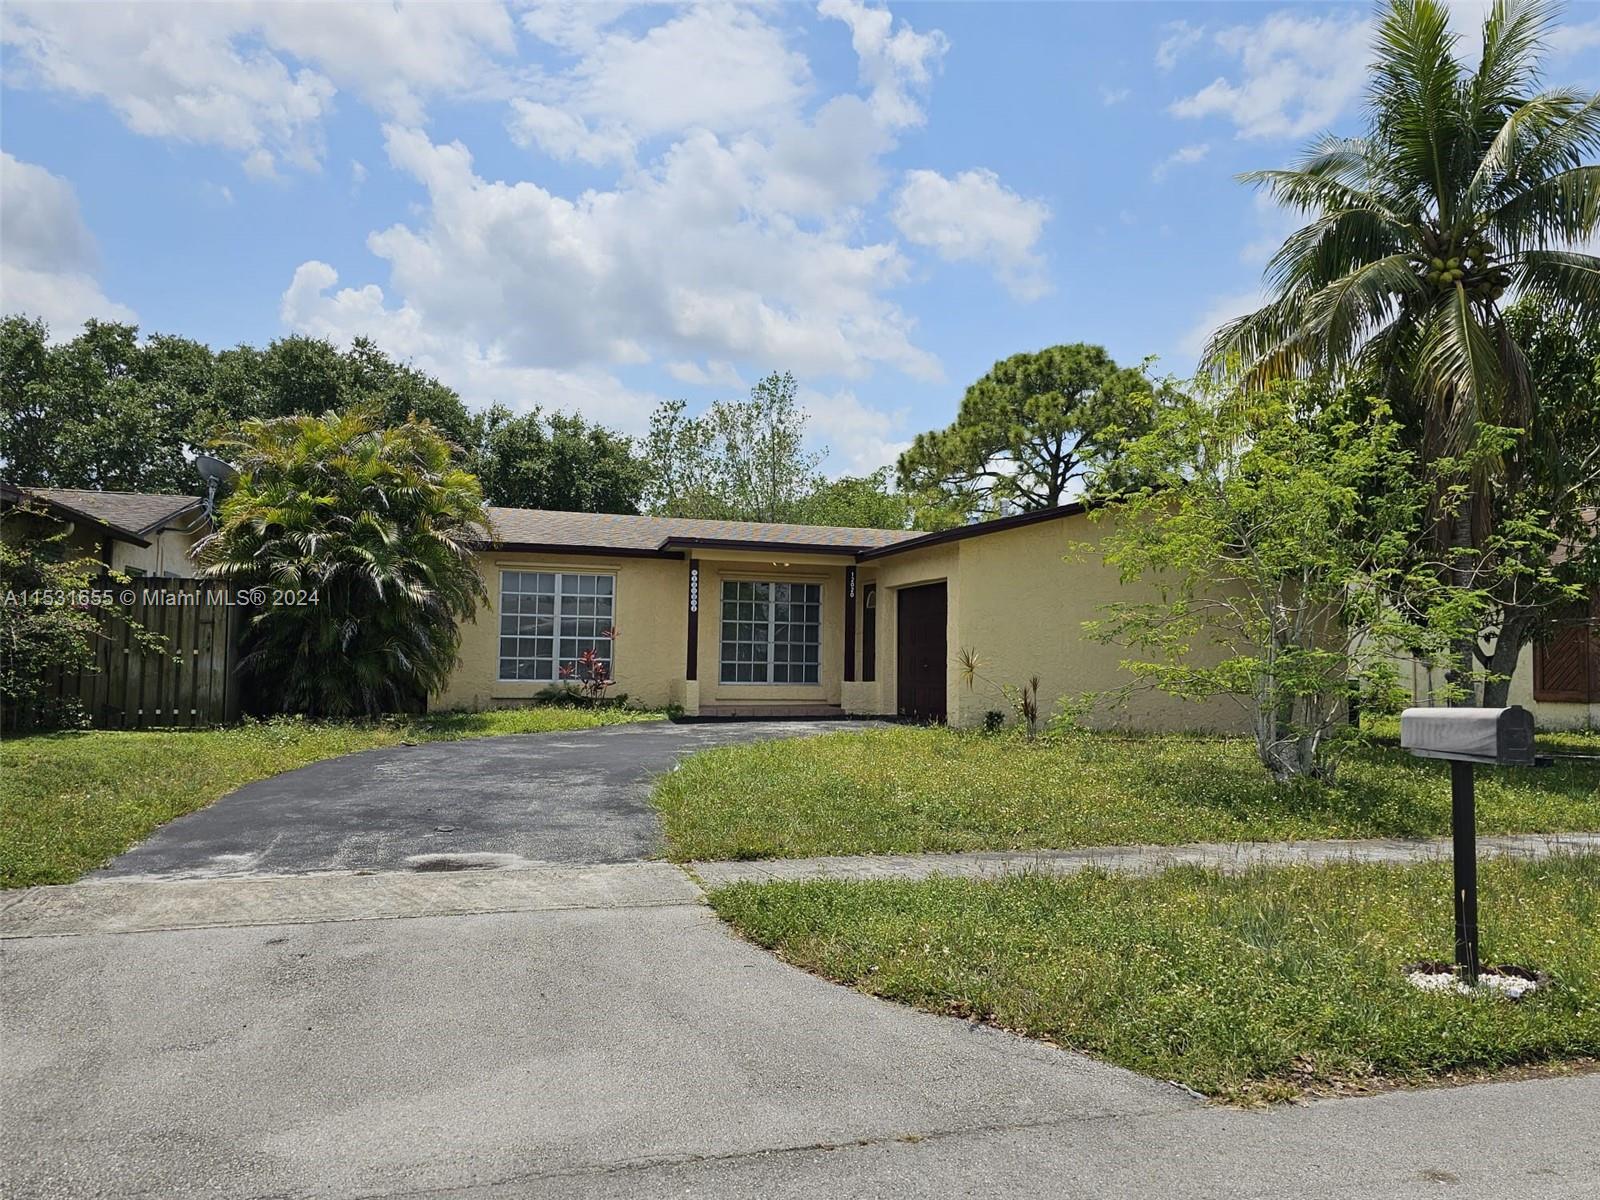 12020 NW 34th Pl, Sunrise, Florida 33323, 5 Bedrooms Bedrooms, ,2 BathroomsBathrooms,Residential,For Sale,12020 NW 34th Pl,A11531655